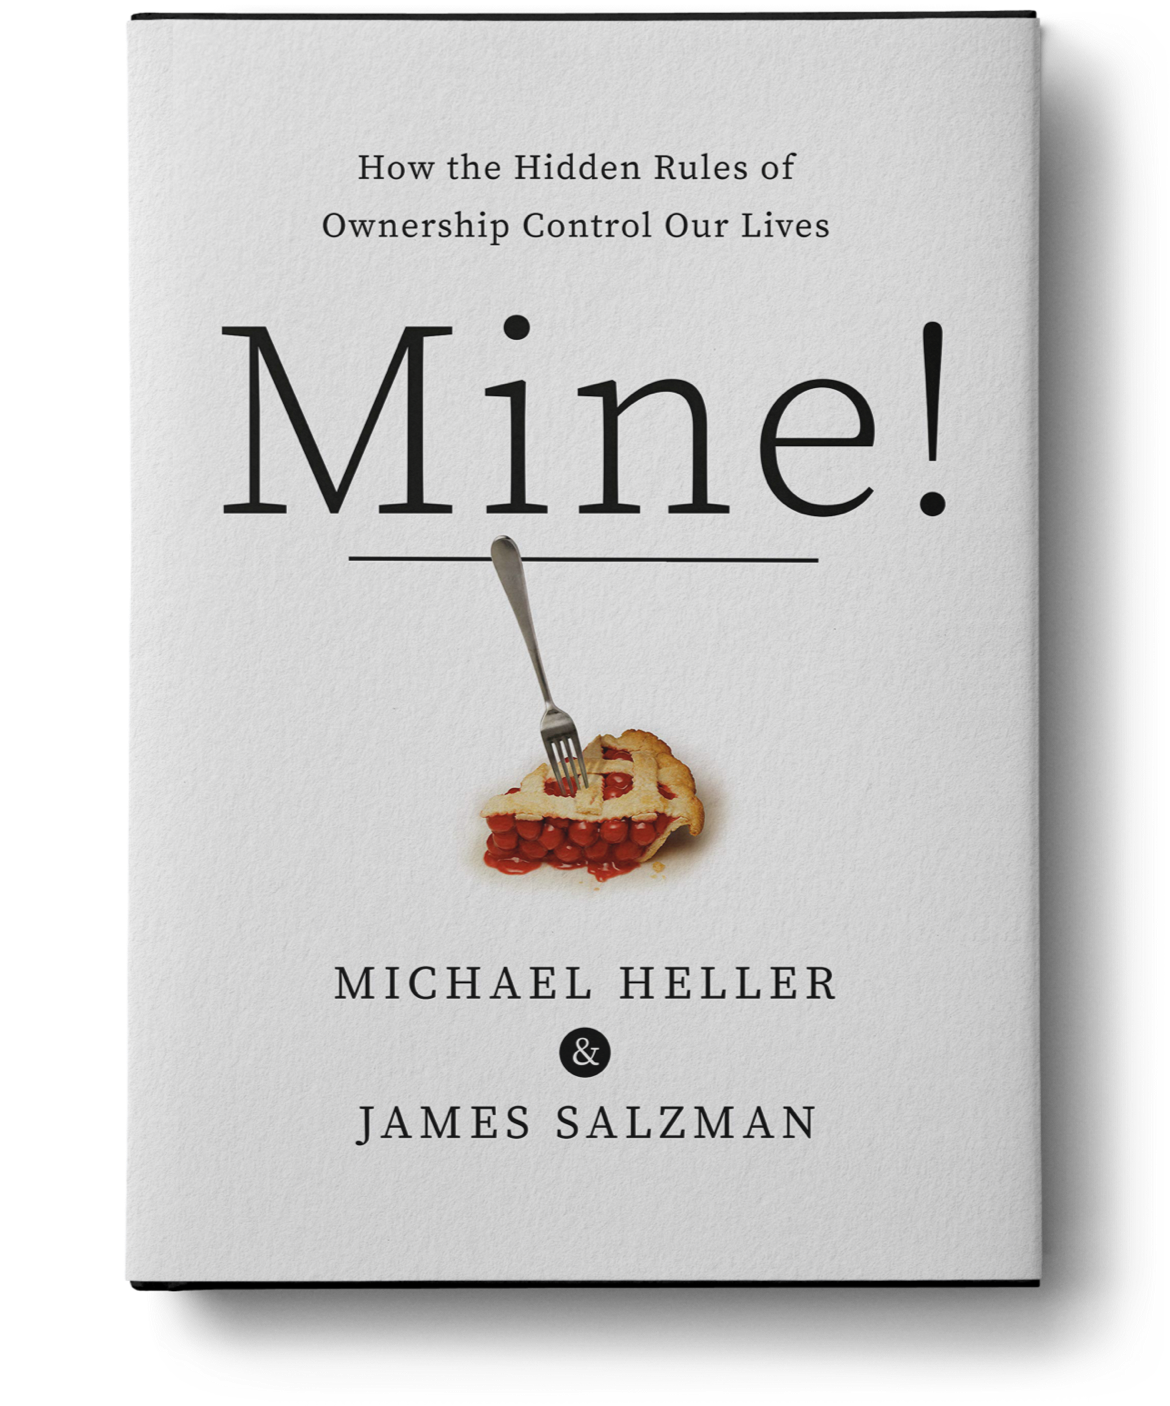 https://www.minethebook.com/wp-content/uploads/2020/10/mine-cover@2x.png